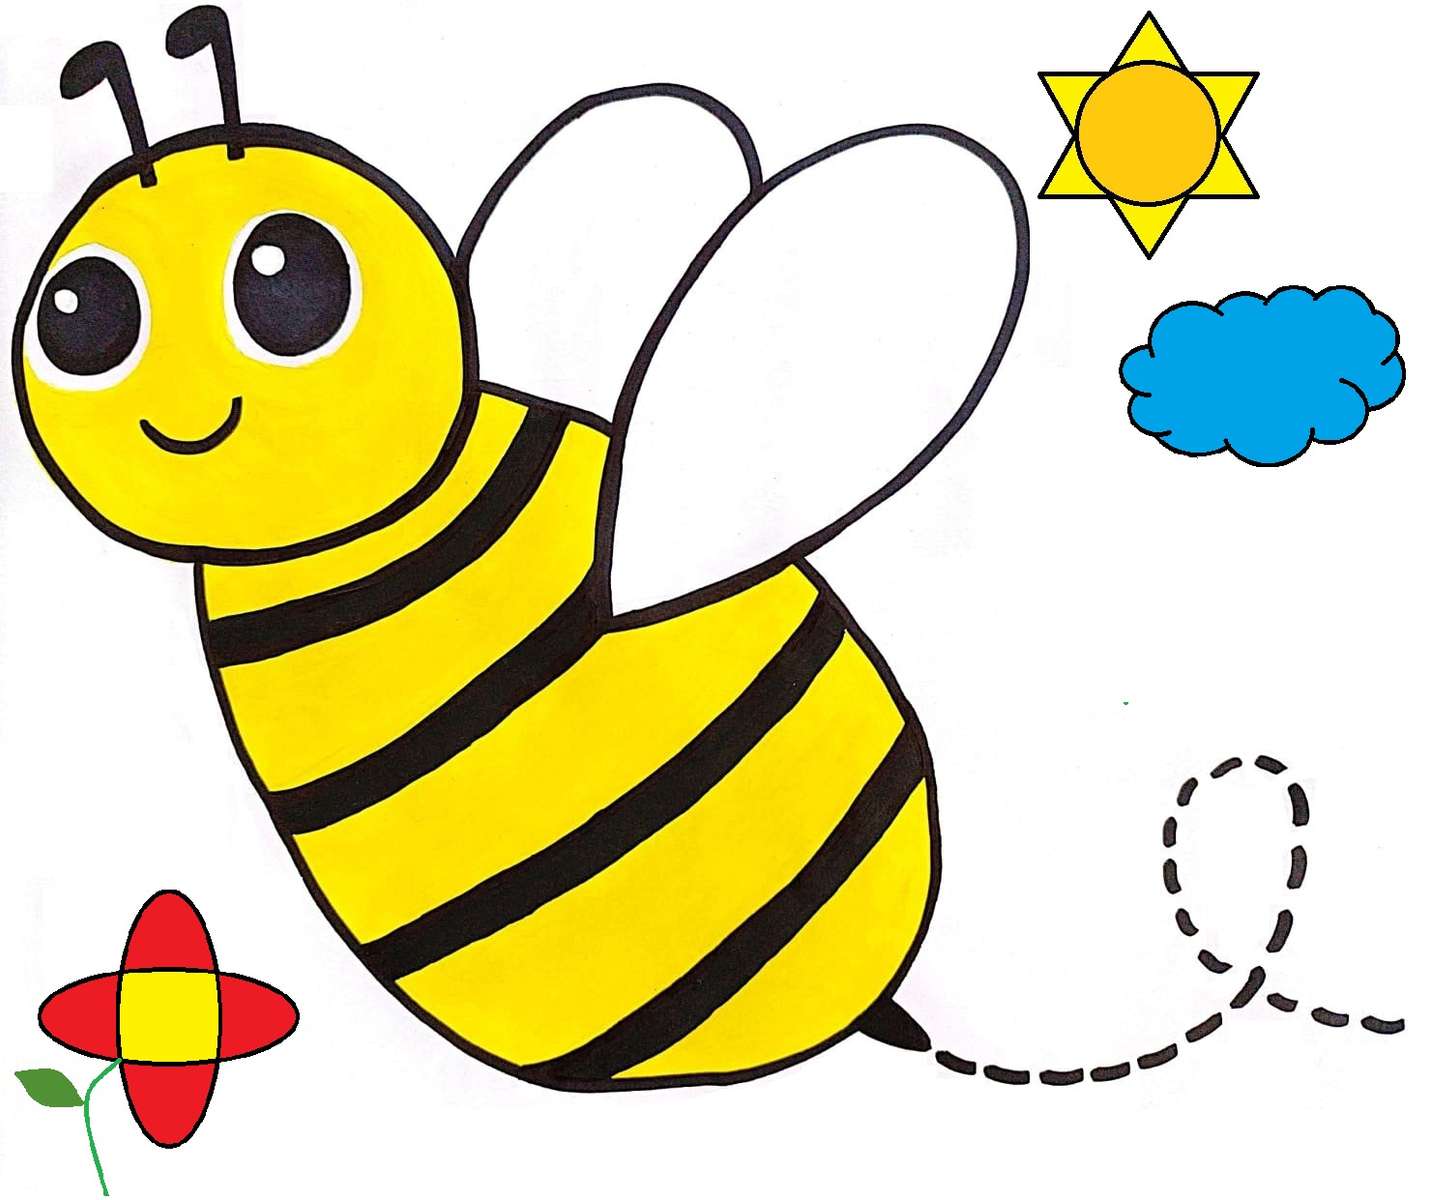 Insect - Bee online puzzle